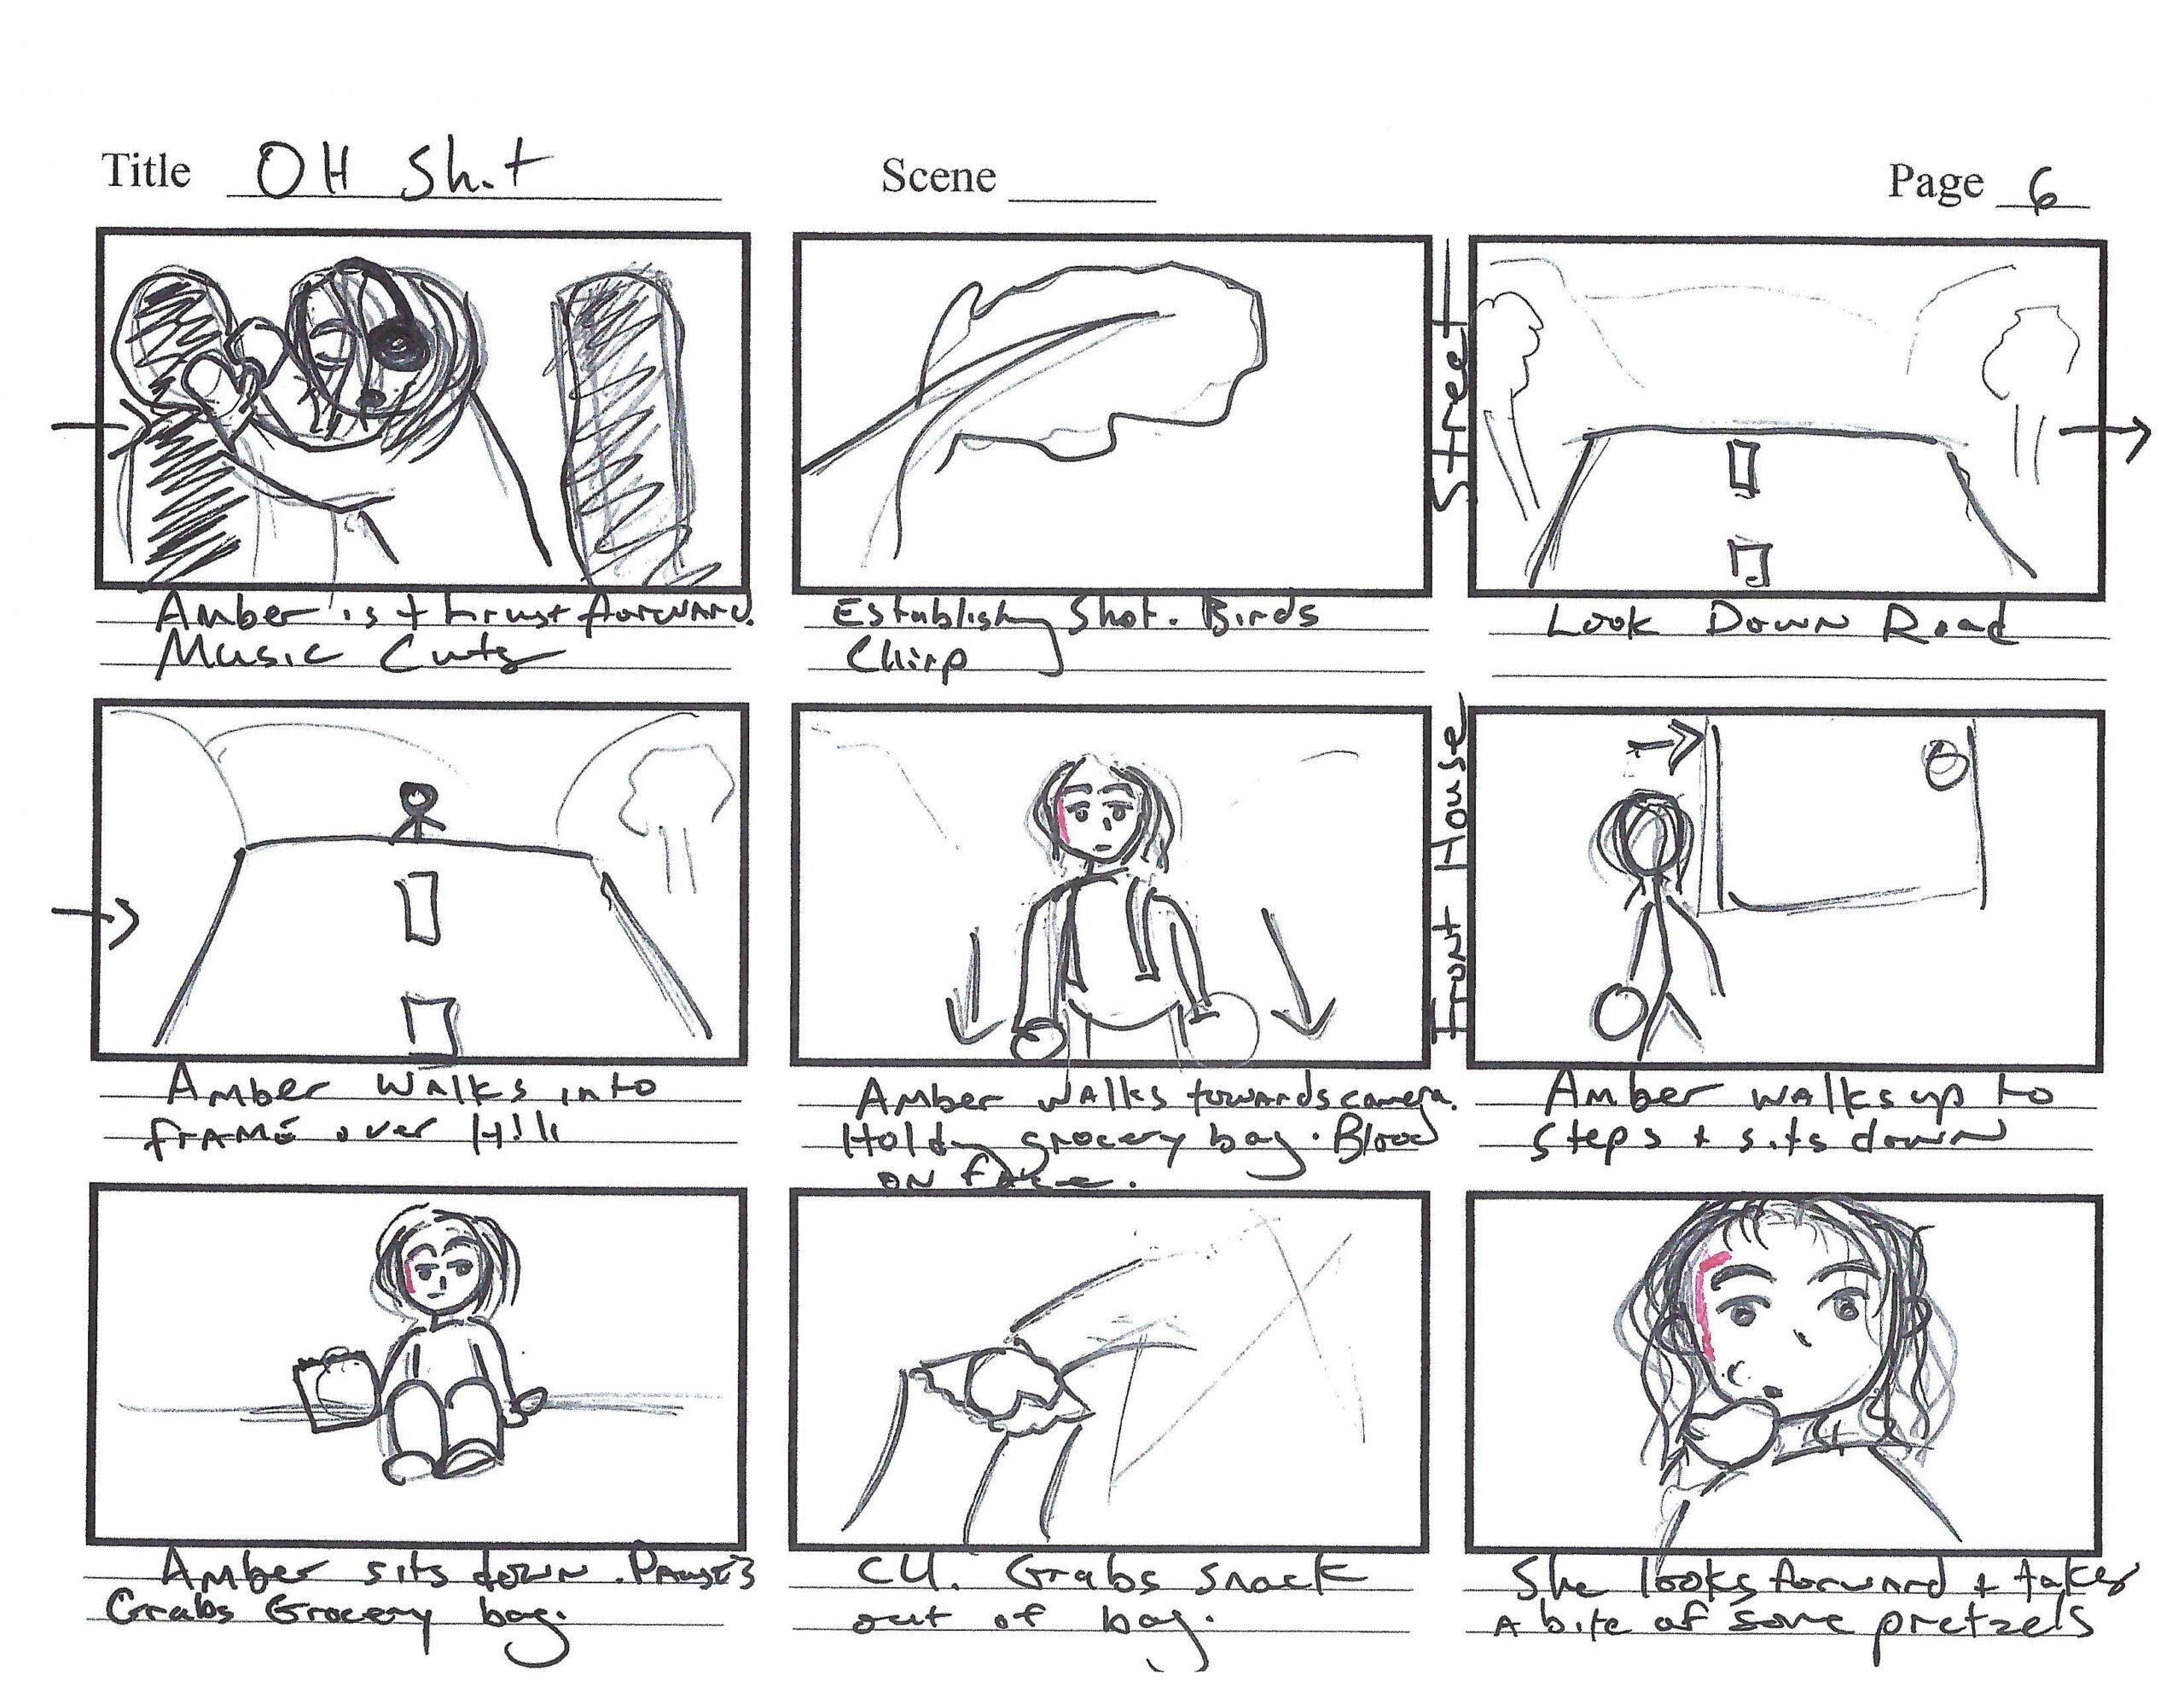 OhShitStoryboards_Page_6